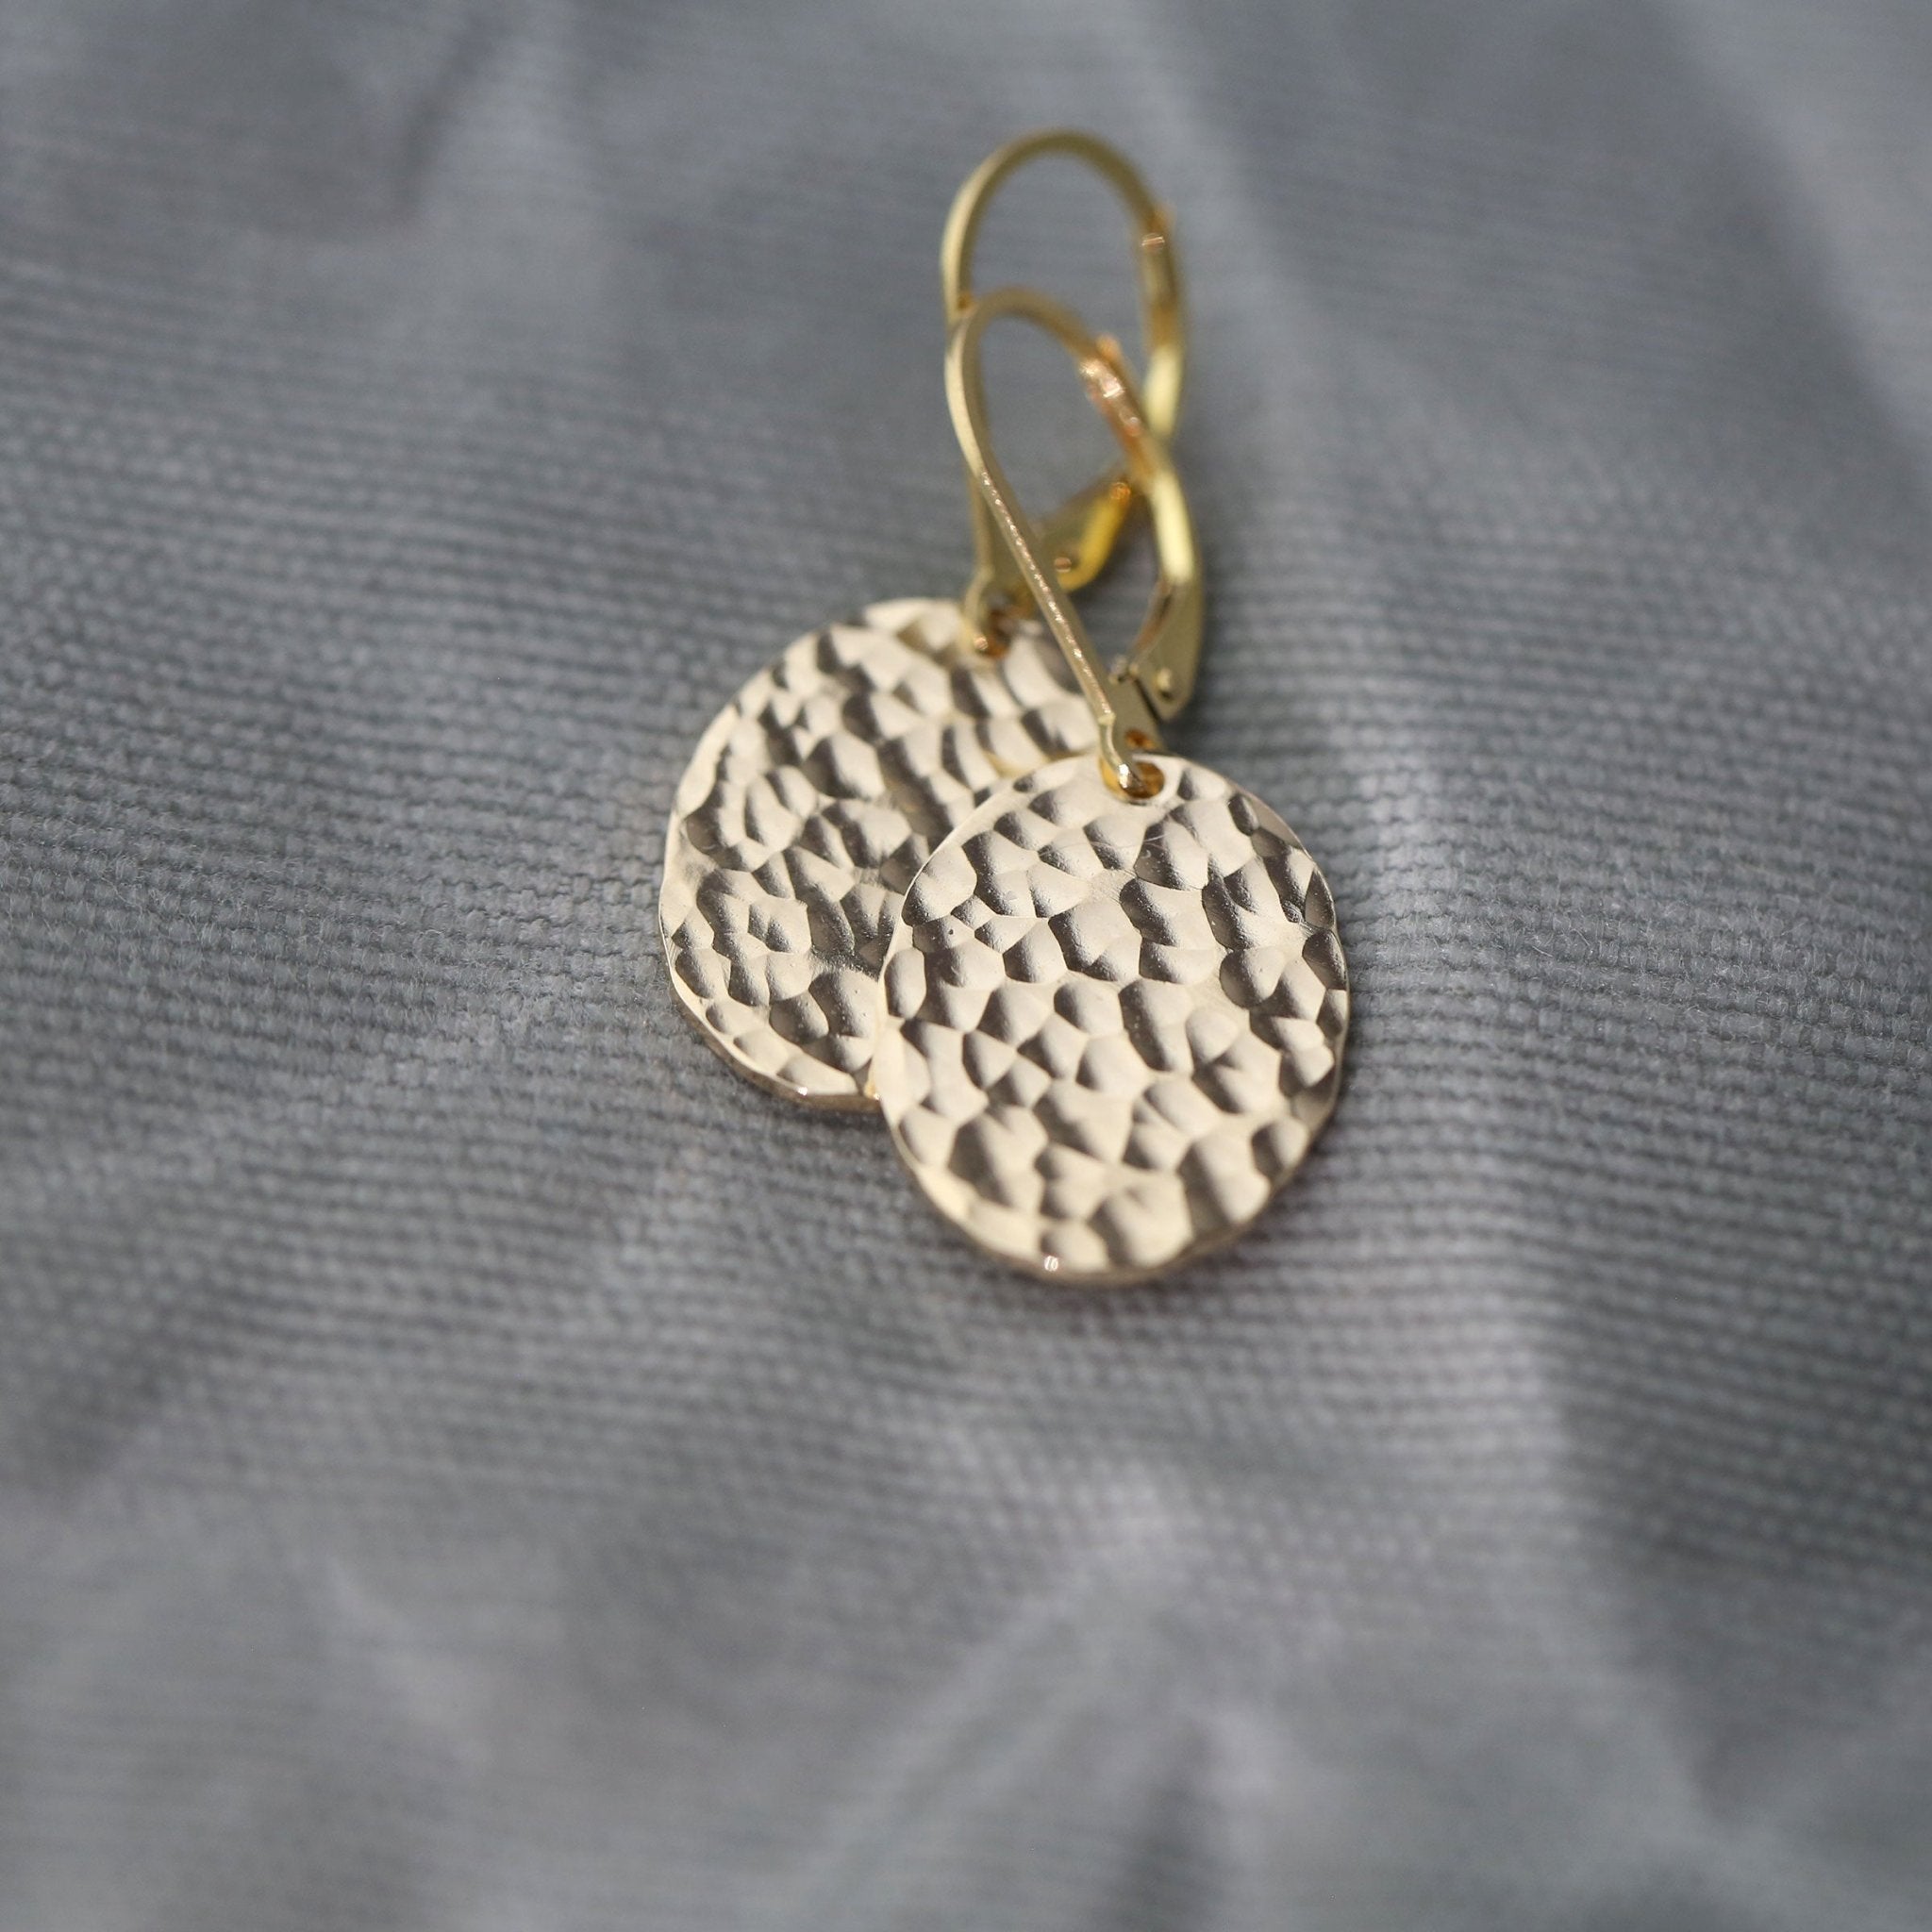 Oval Hammered Gold Lever-back Earrings handmade by Burnish